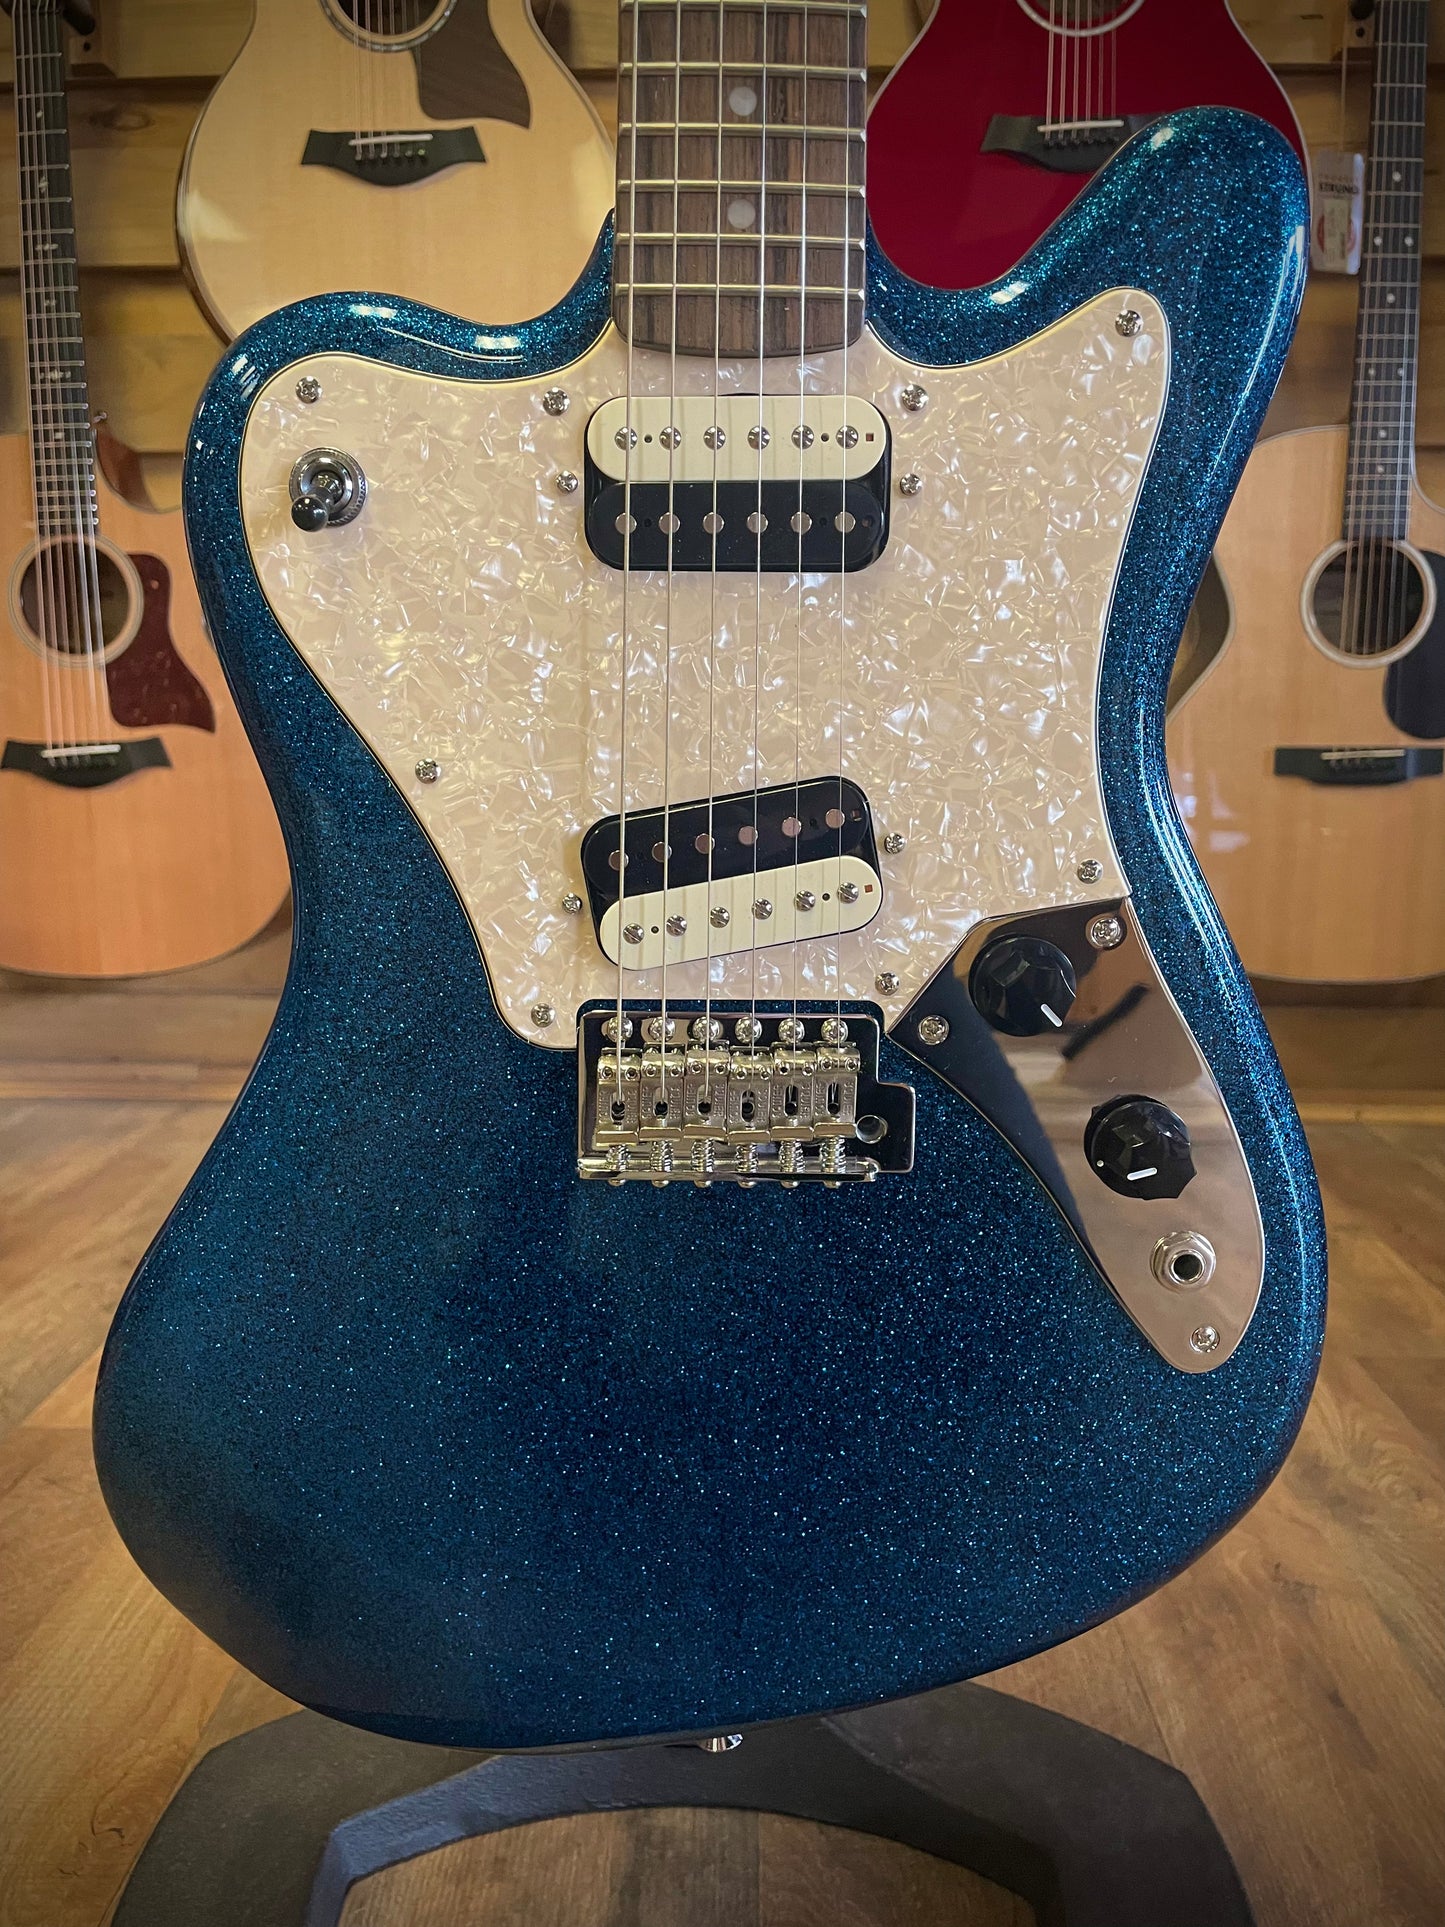 Squier Paranormal Super-Sonic Electric Guitar - Blue Sparkle with